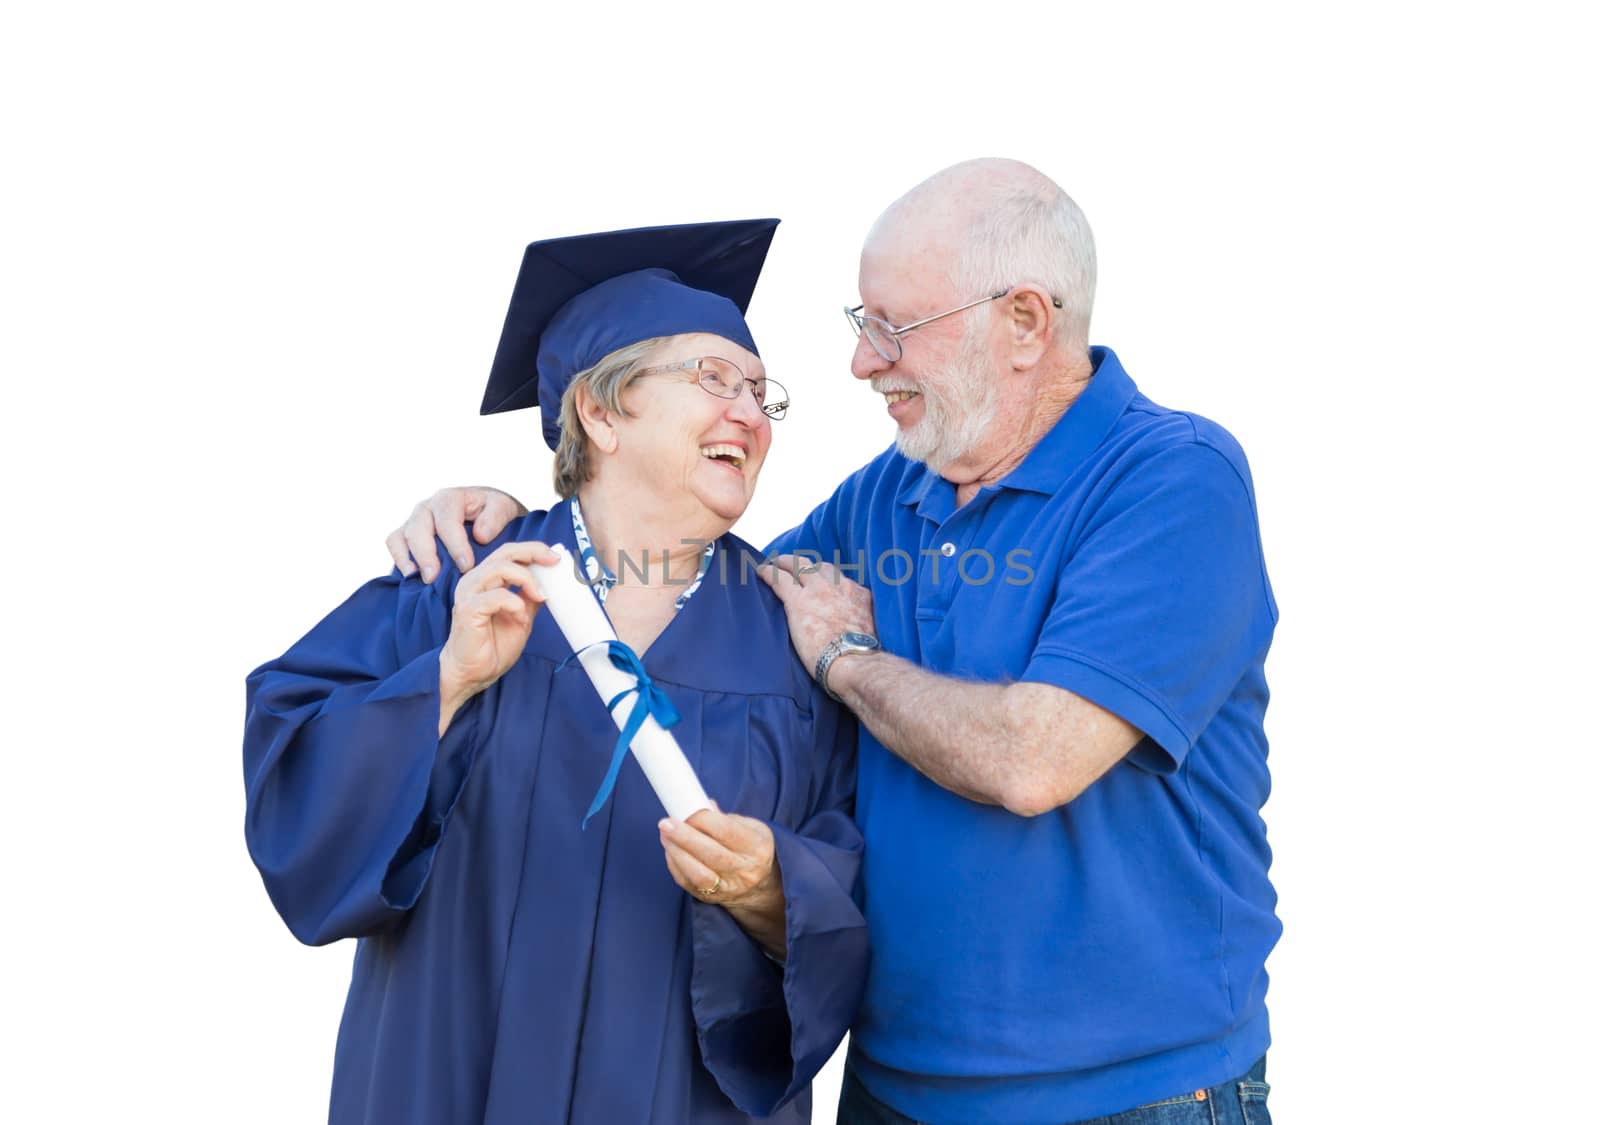 Senior Adult Woman Graduate in Cap and Gown Being Congratulated By Husband Isolated on White.